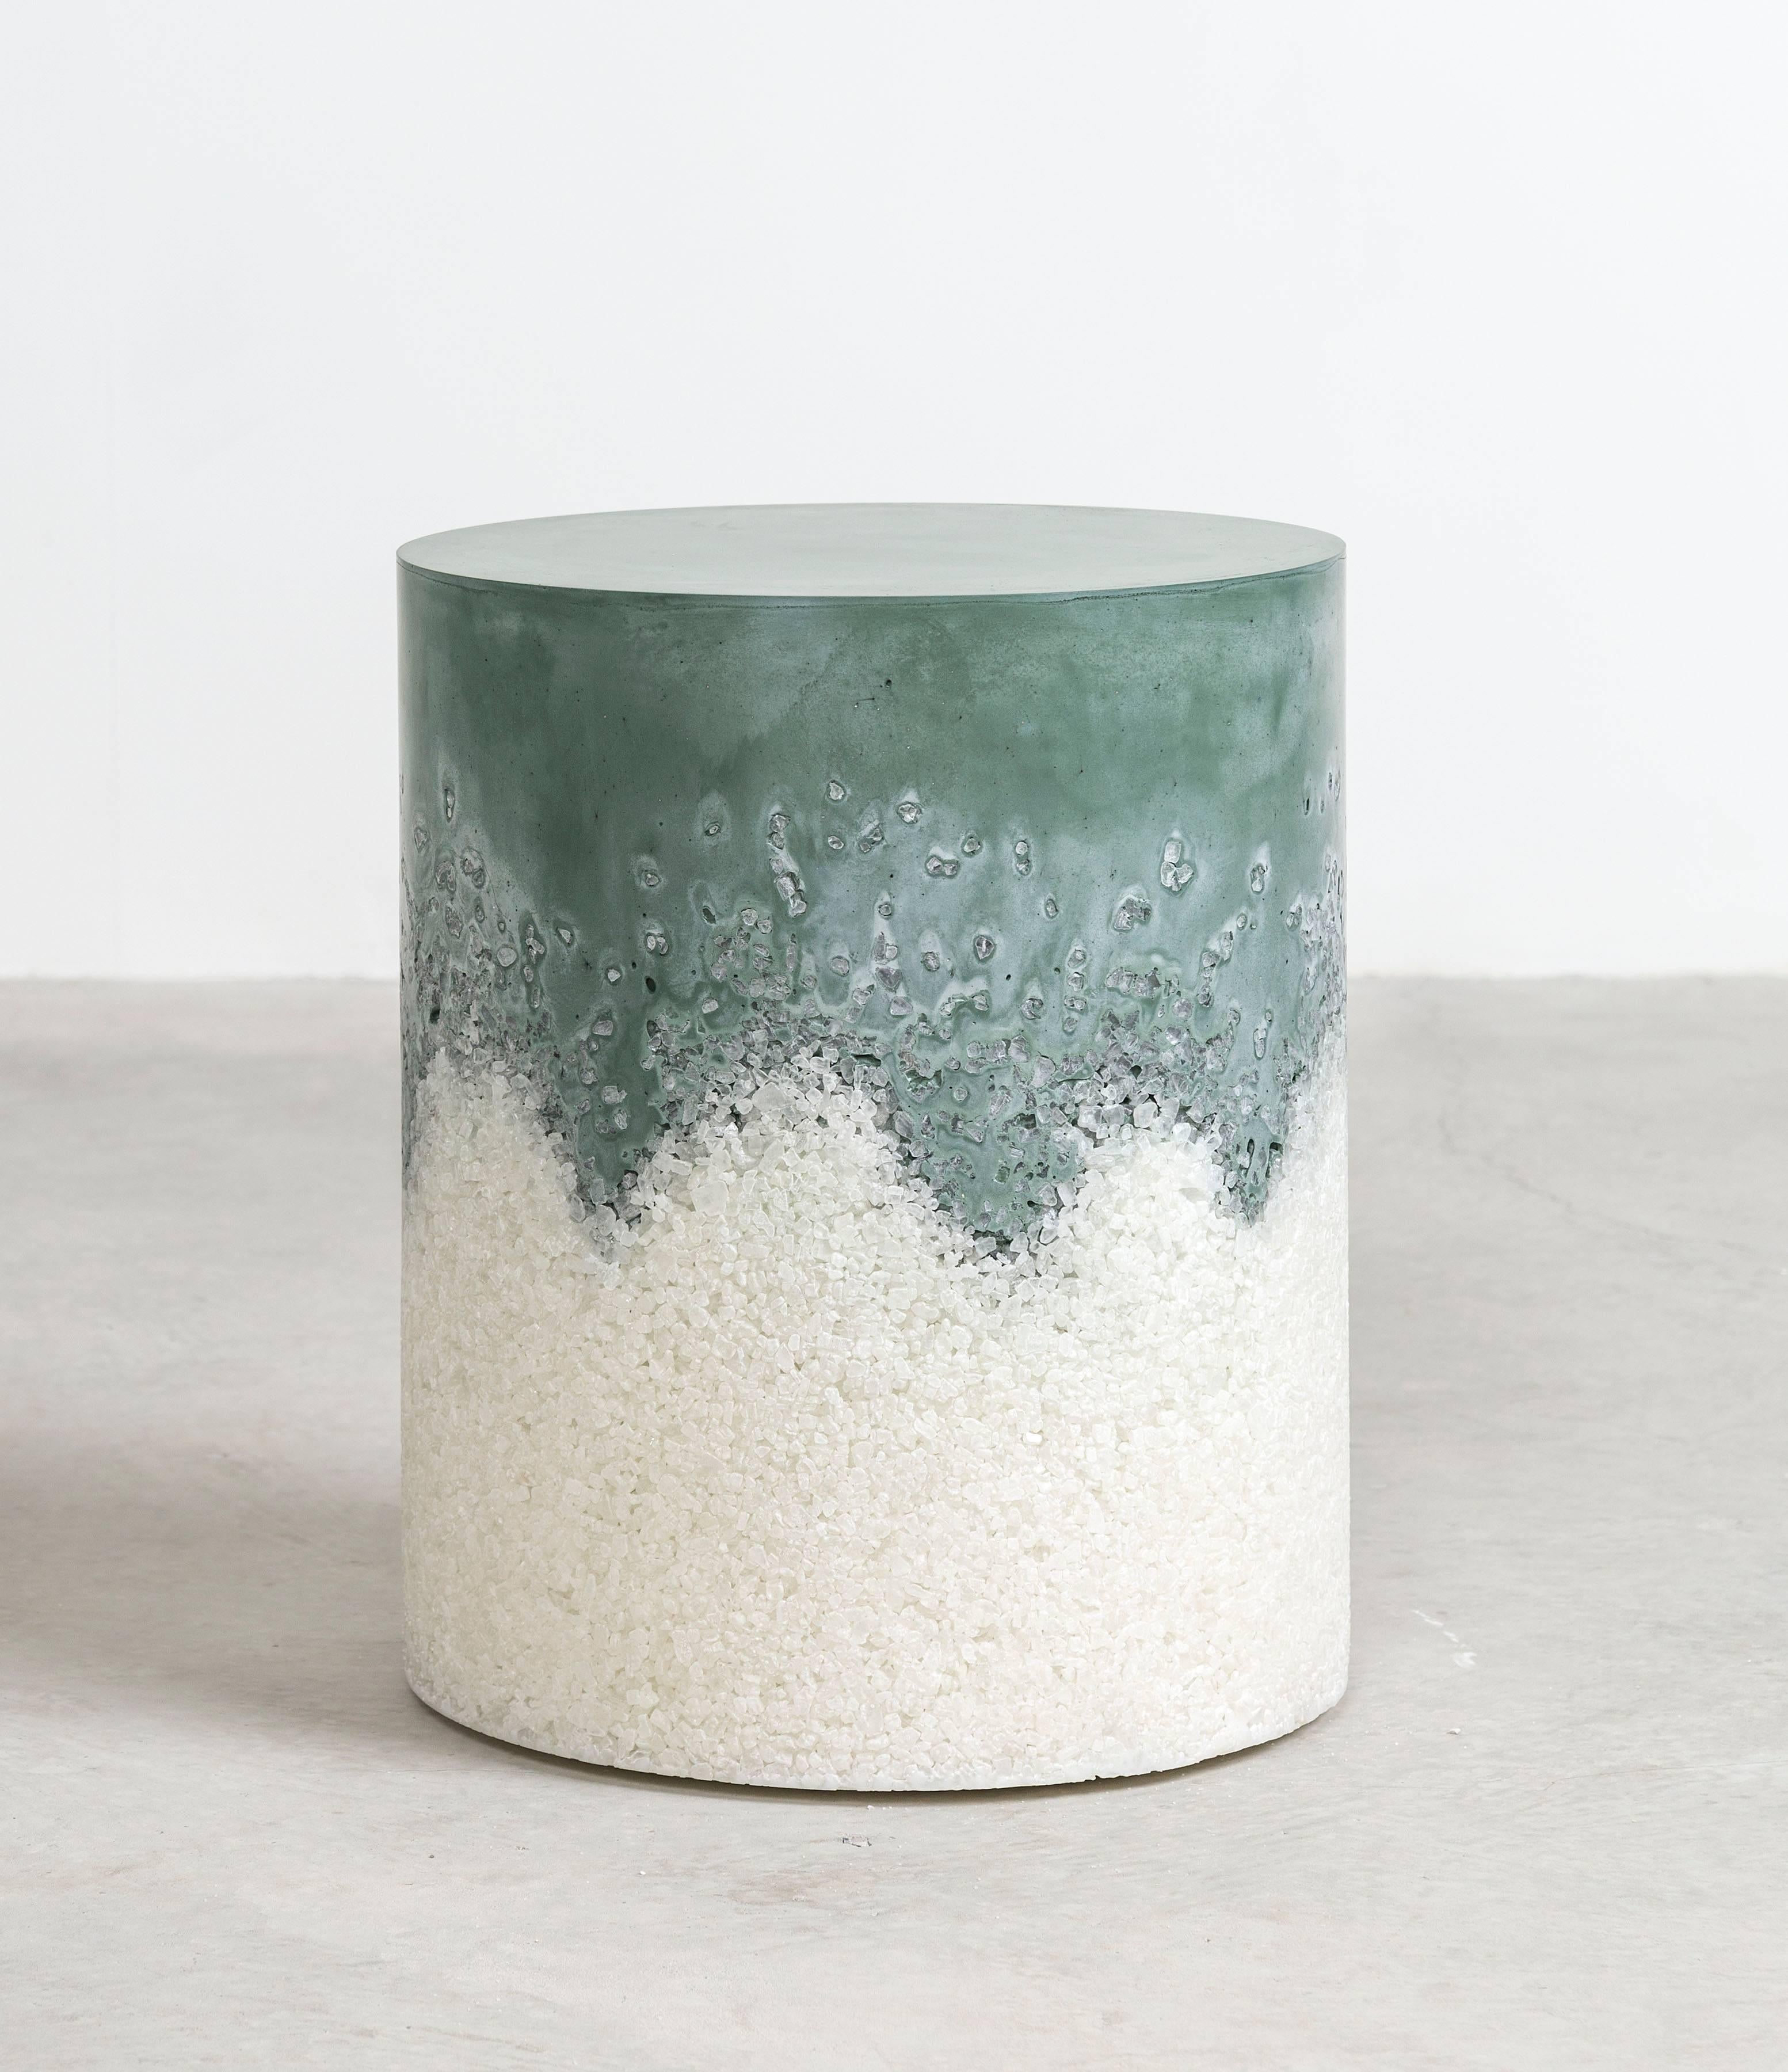 A layering of cement and crushed aggregates, the made-to-order drum consists of an hand-dyed hunter green cement top and a packed white rock salt bottom. Poured by hand over the jagged minerals, the hunter green cement merges the materials to create